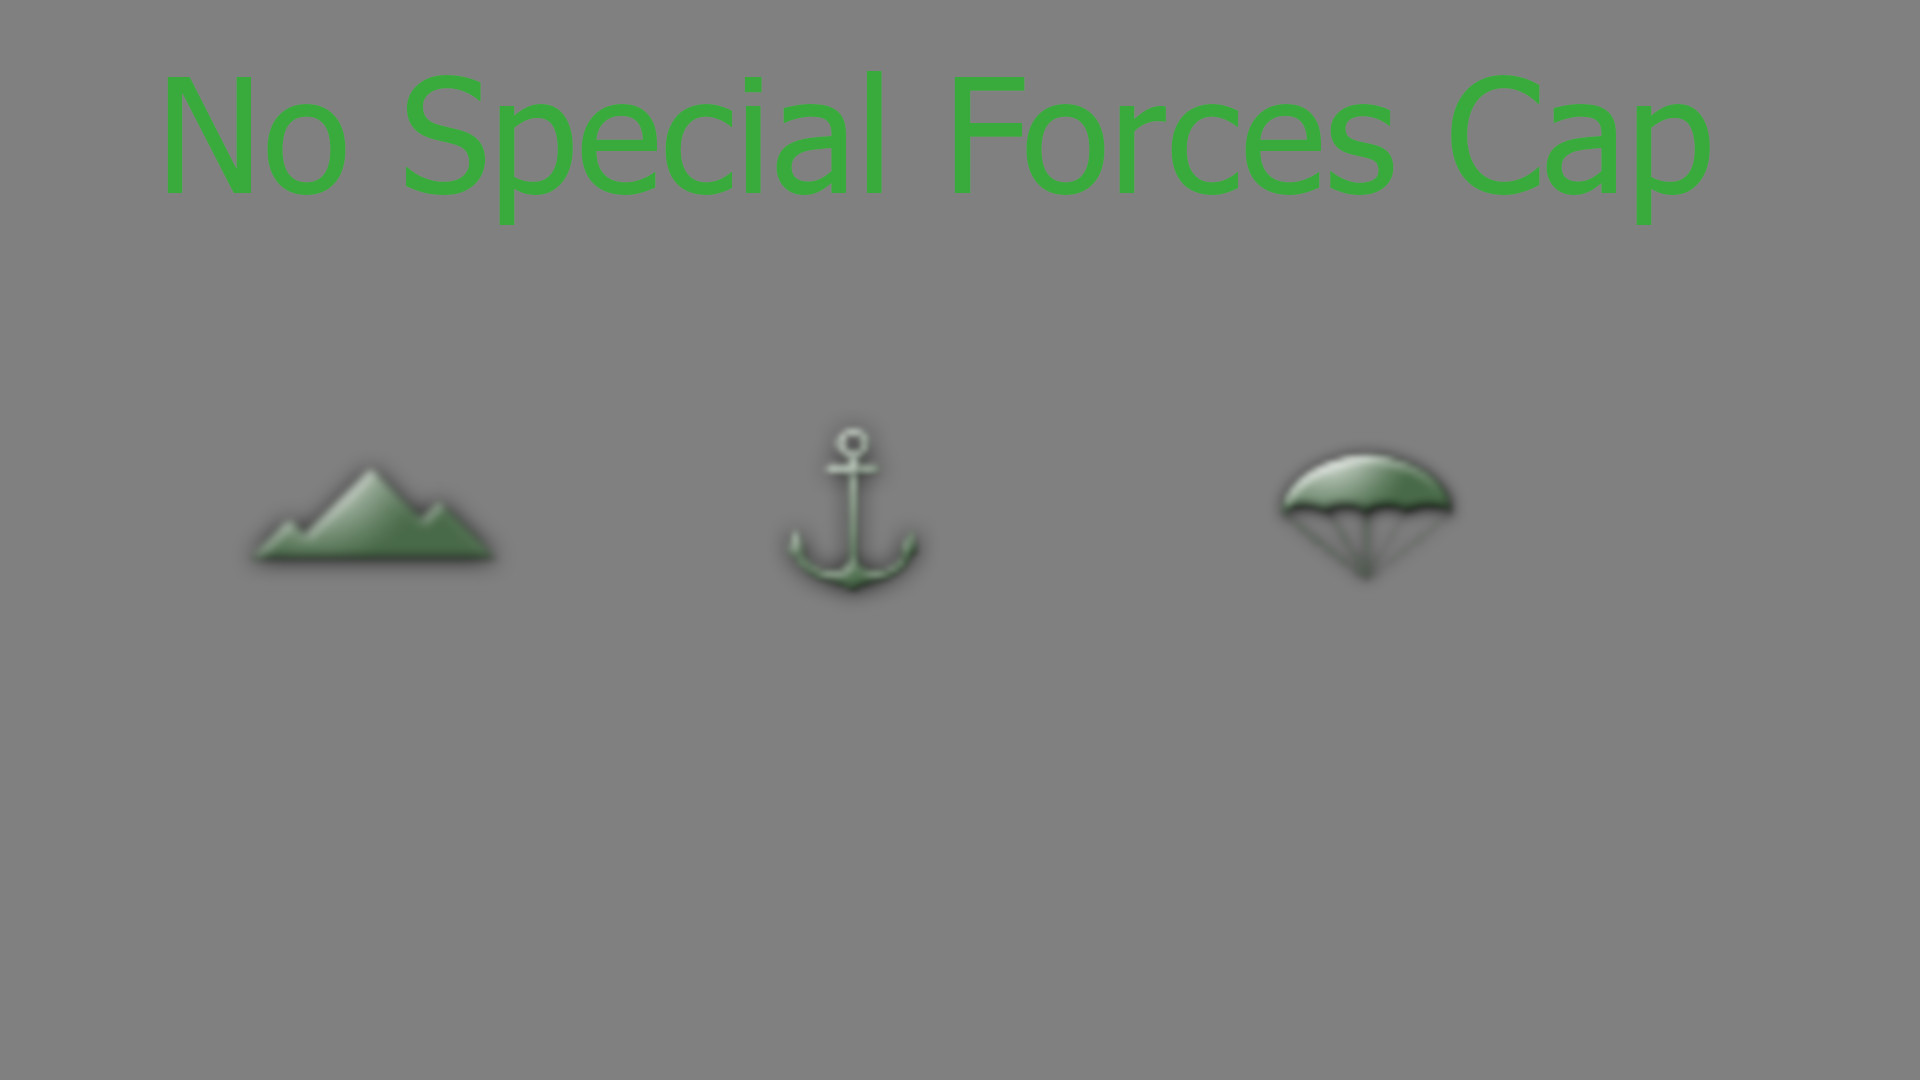 hearts of iron 4 special forces cap